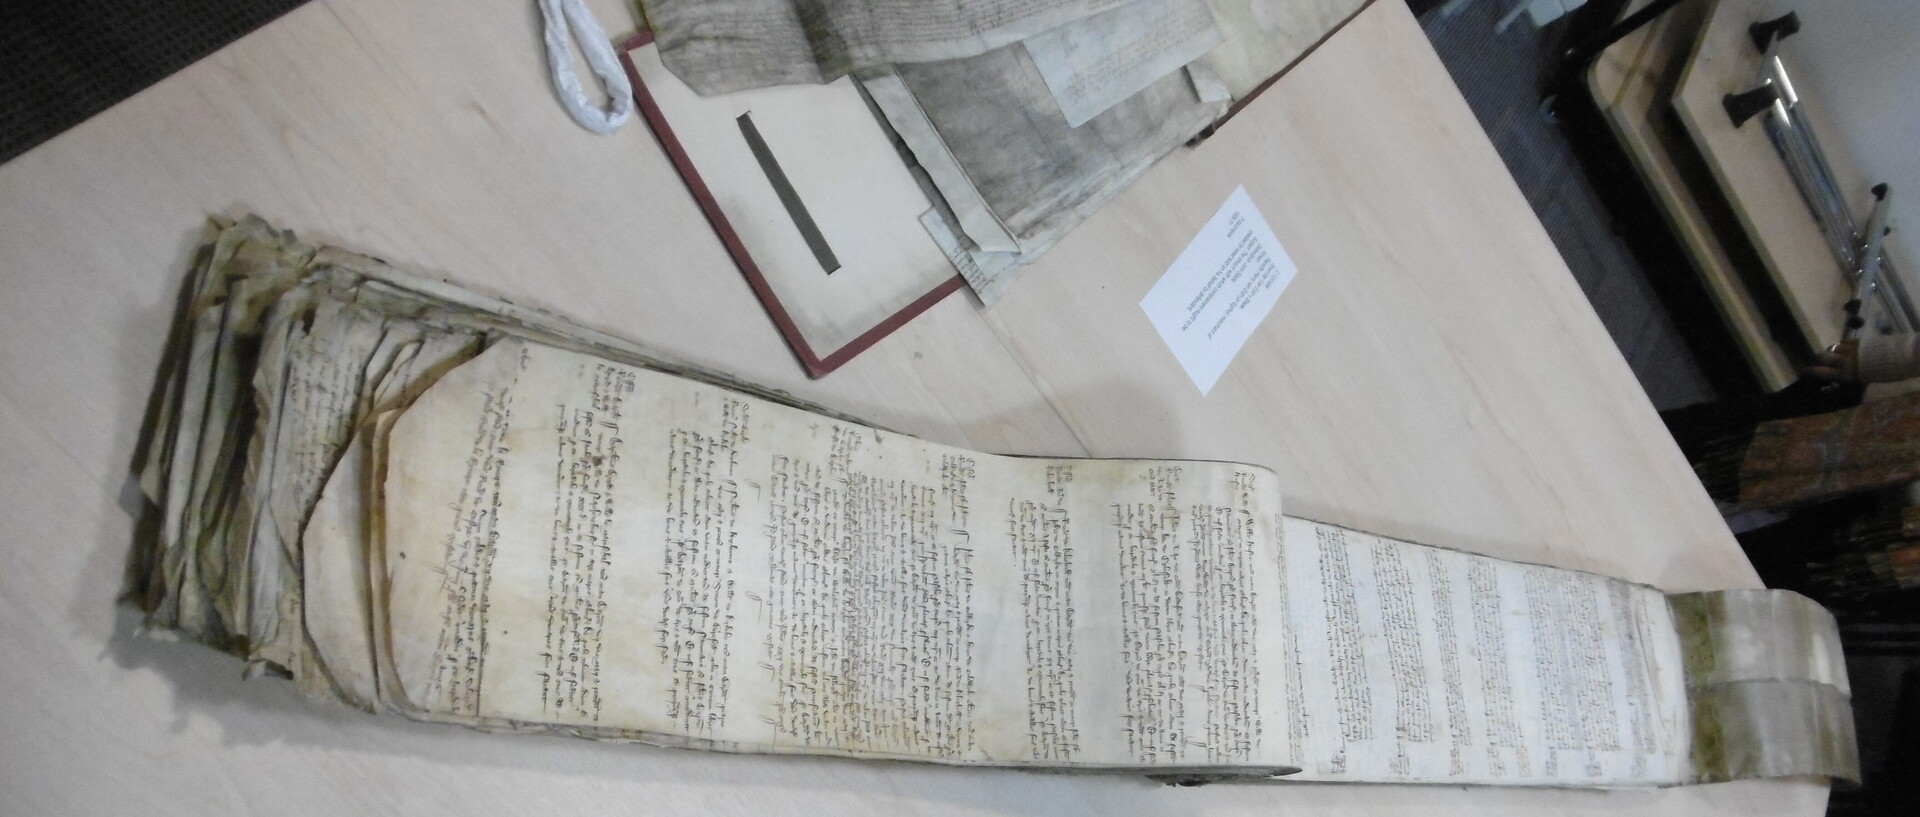 A Manuscript laid out on a table.